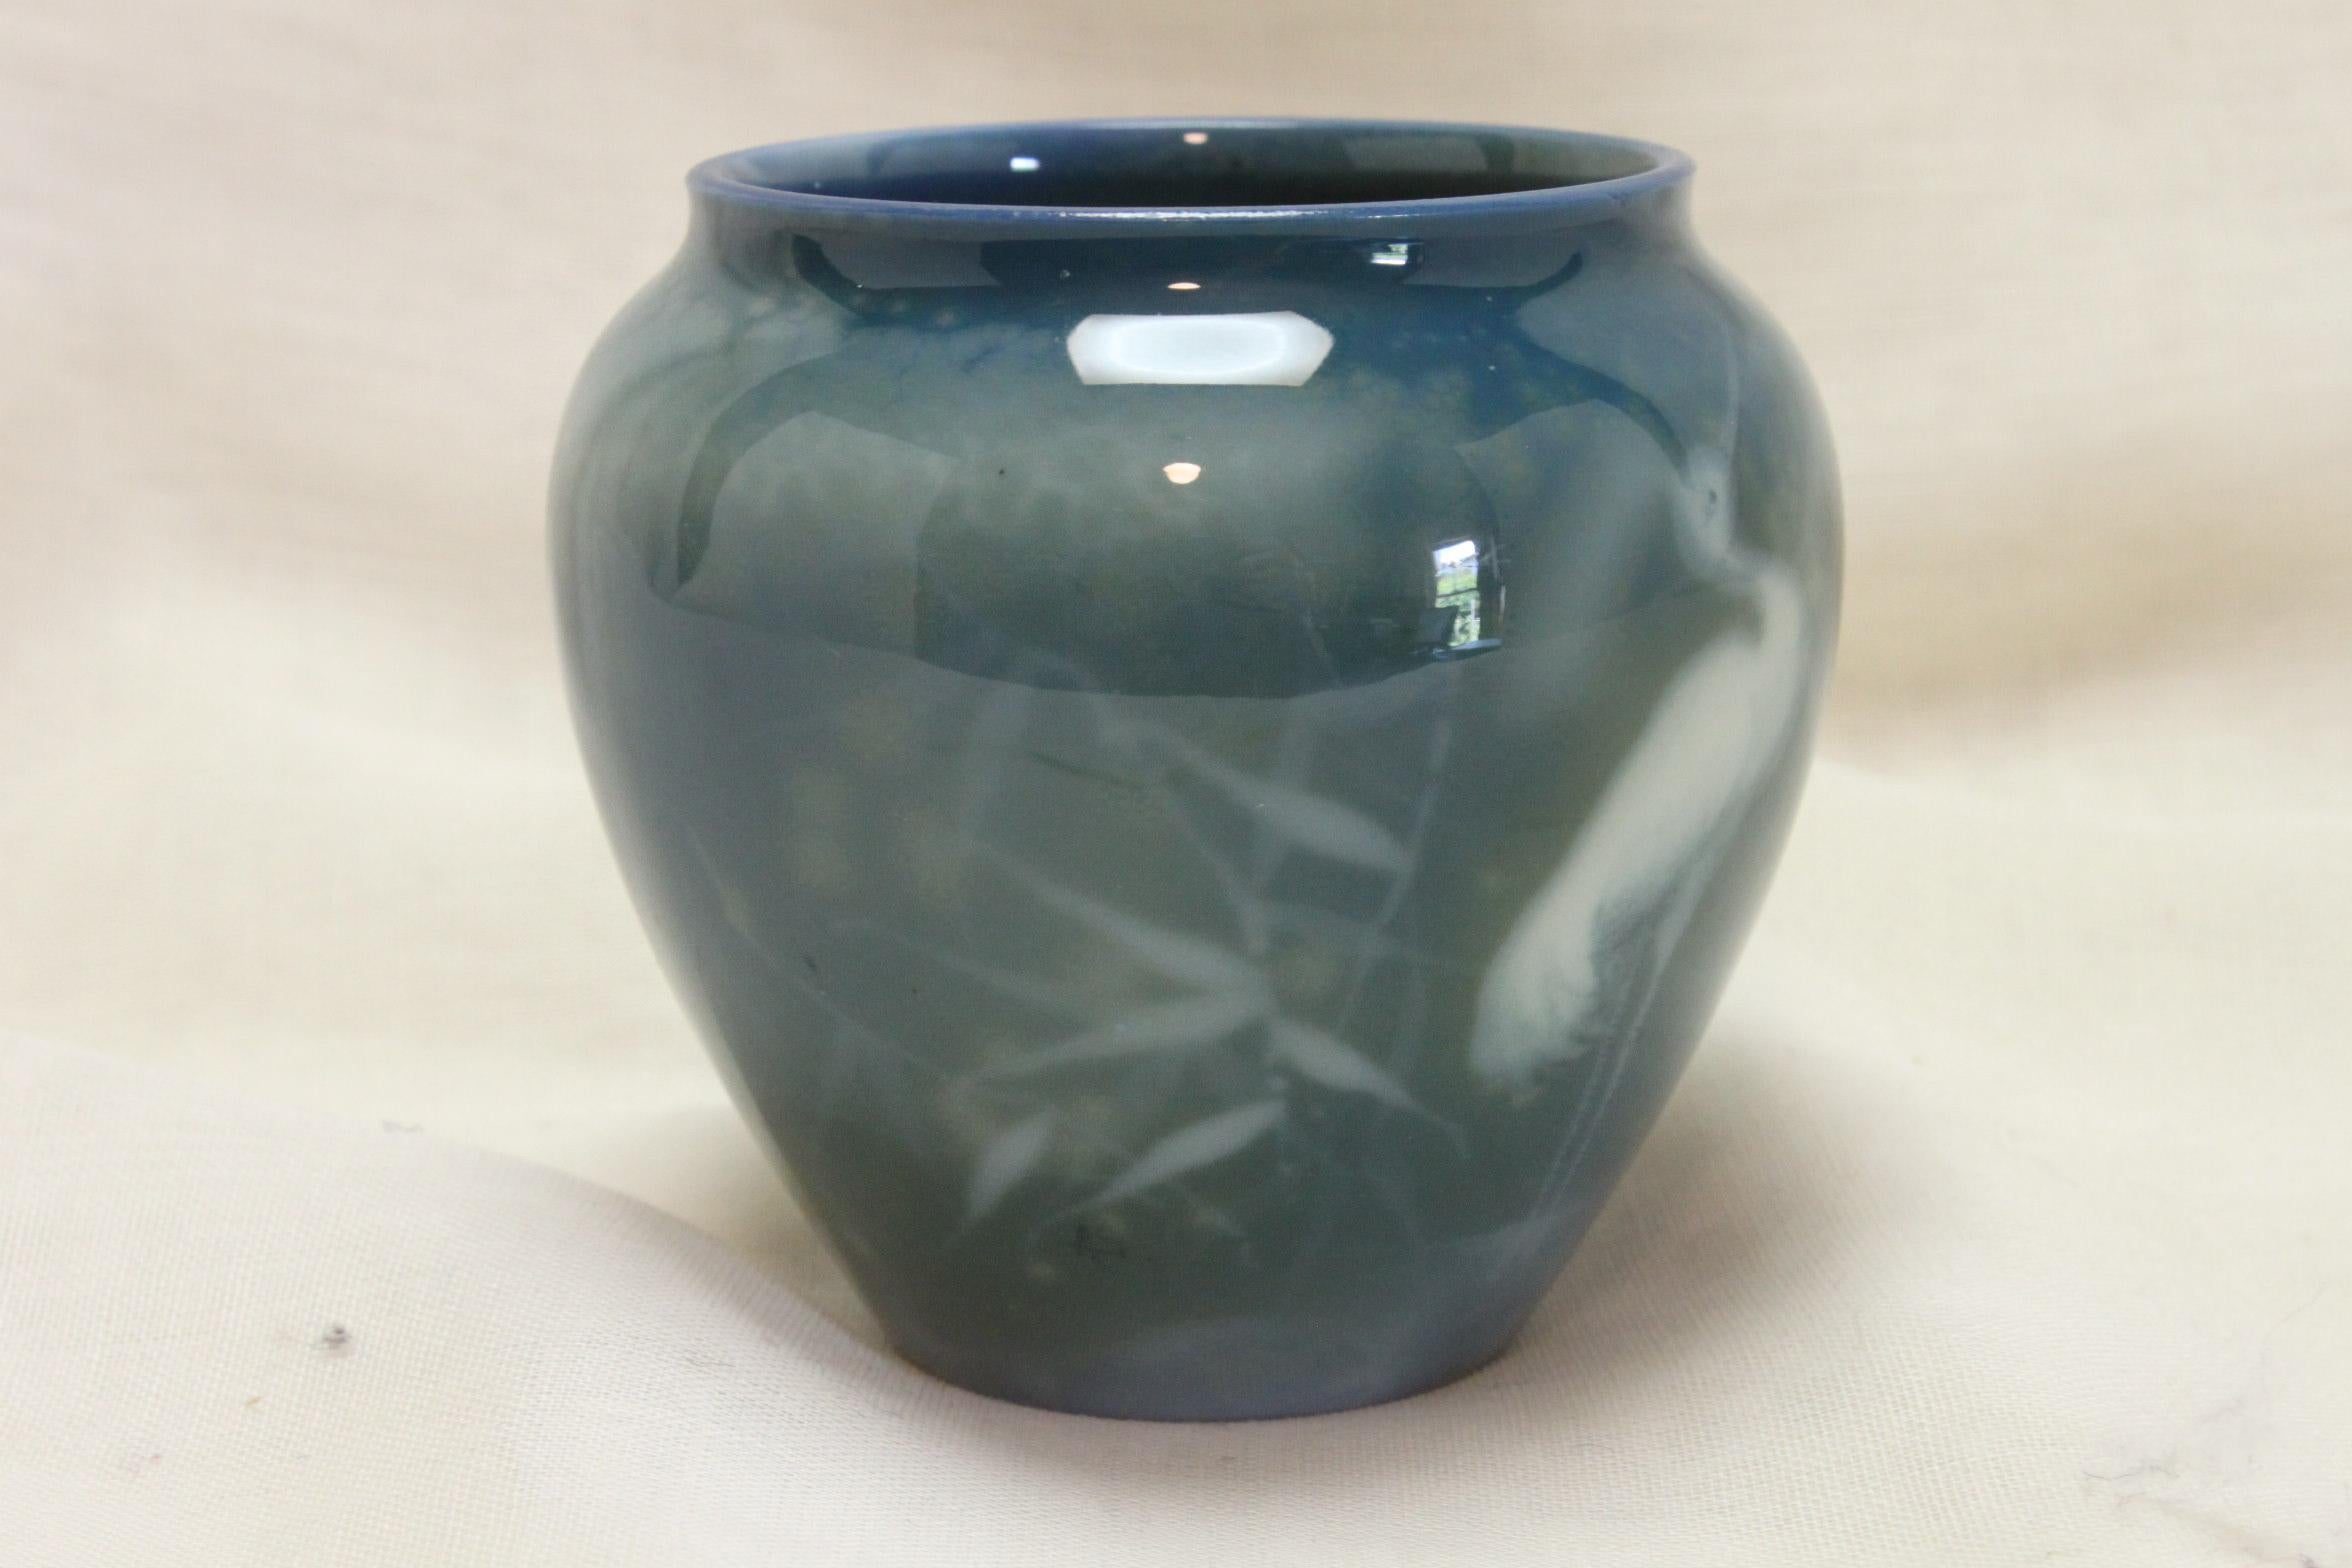 This small urn shaped vase is from Royal Worcester's Sabrina Ware range and is decorated with a mist-like scene of a stork standing near some bamboo. Just below the bamboo, it is signed 